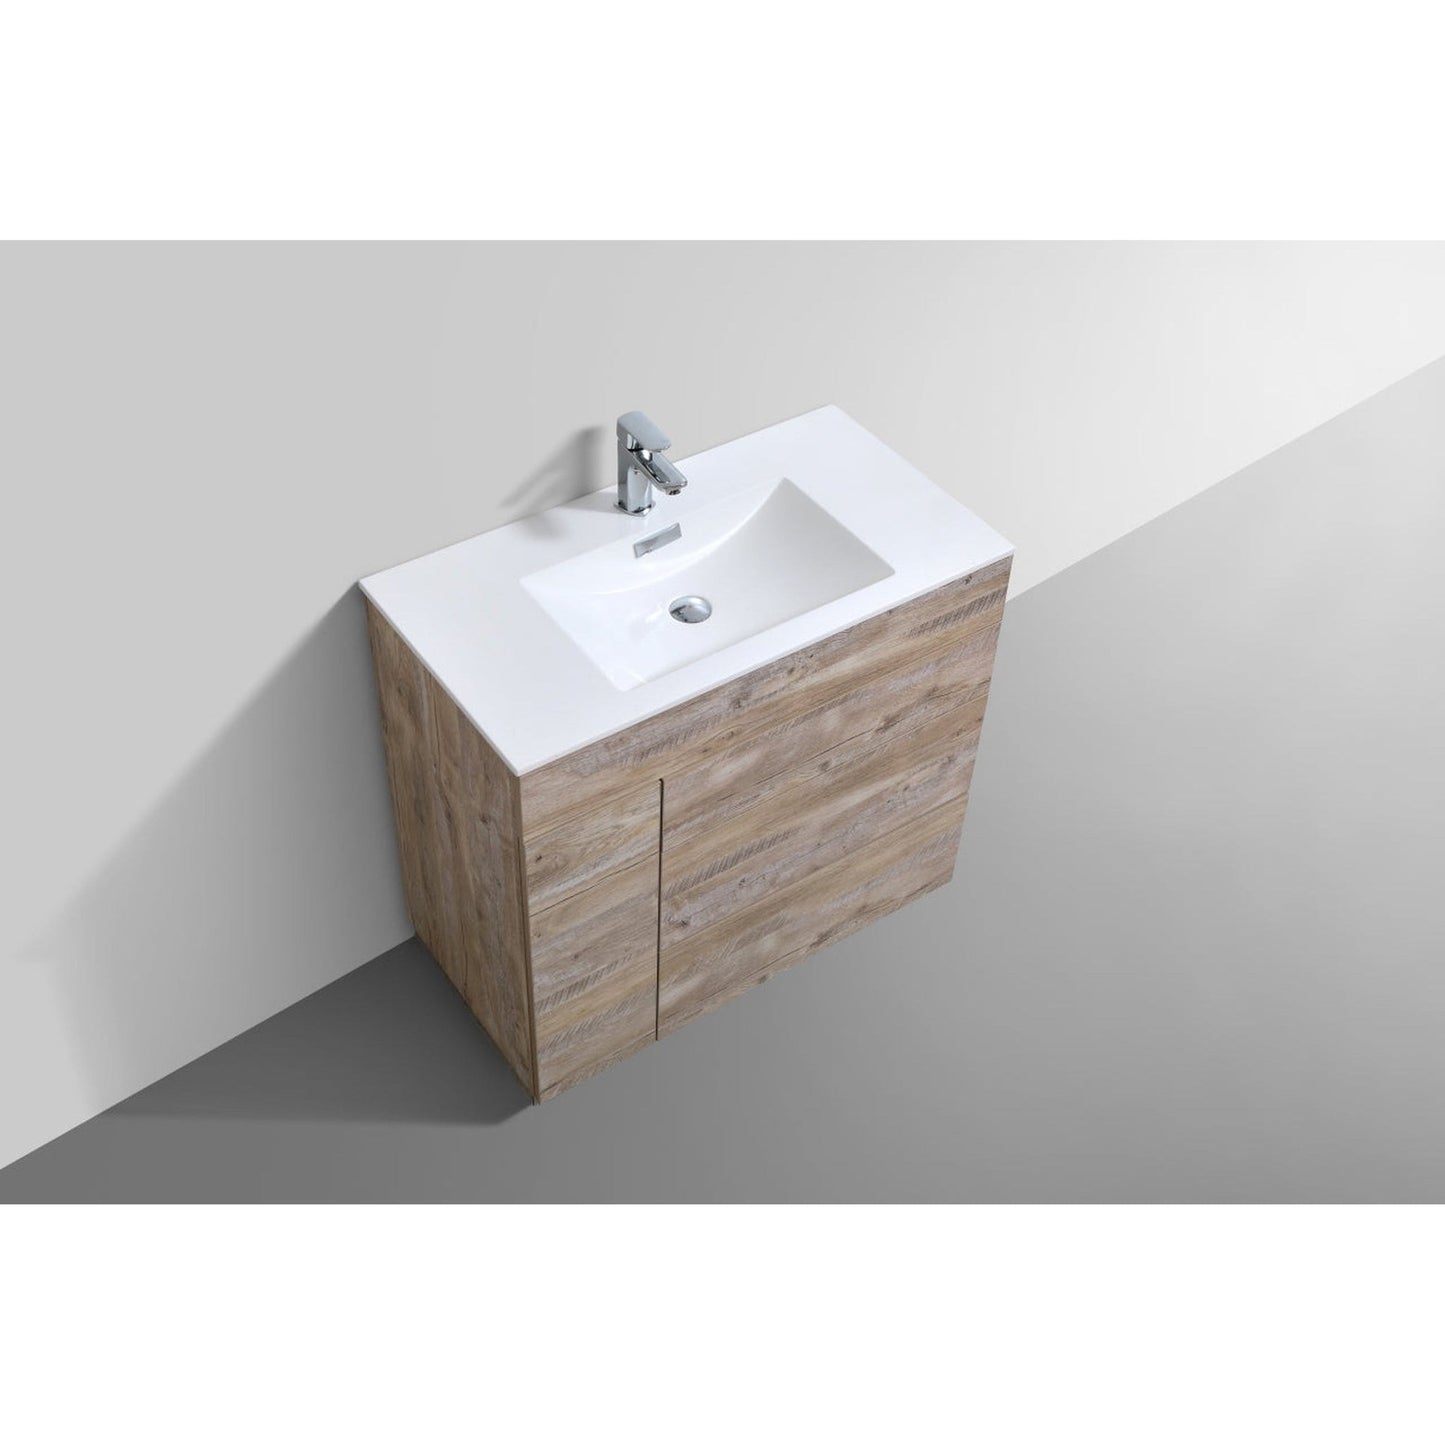 KubeBath Milano 36" Nature Wood Freestanding Modern Bathroom Vanity With Aluminum Kick Plate & Acrylic Composite Integrated Sink With Overflow and 36" Wood Framed Mirror With Shelf